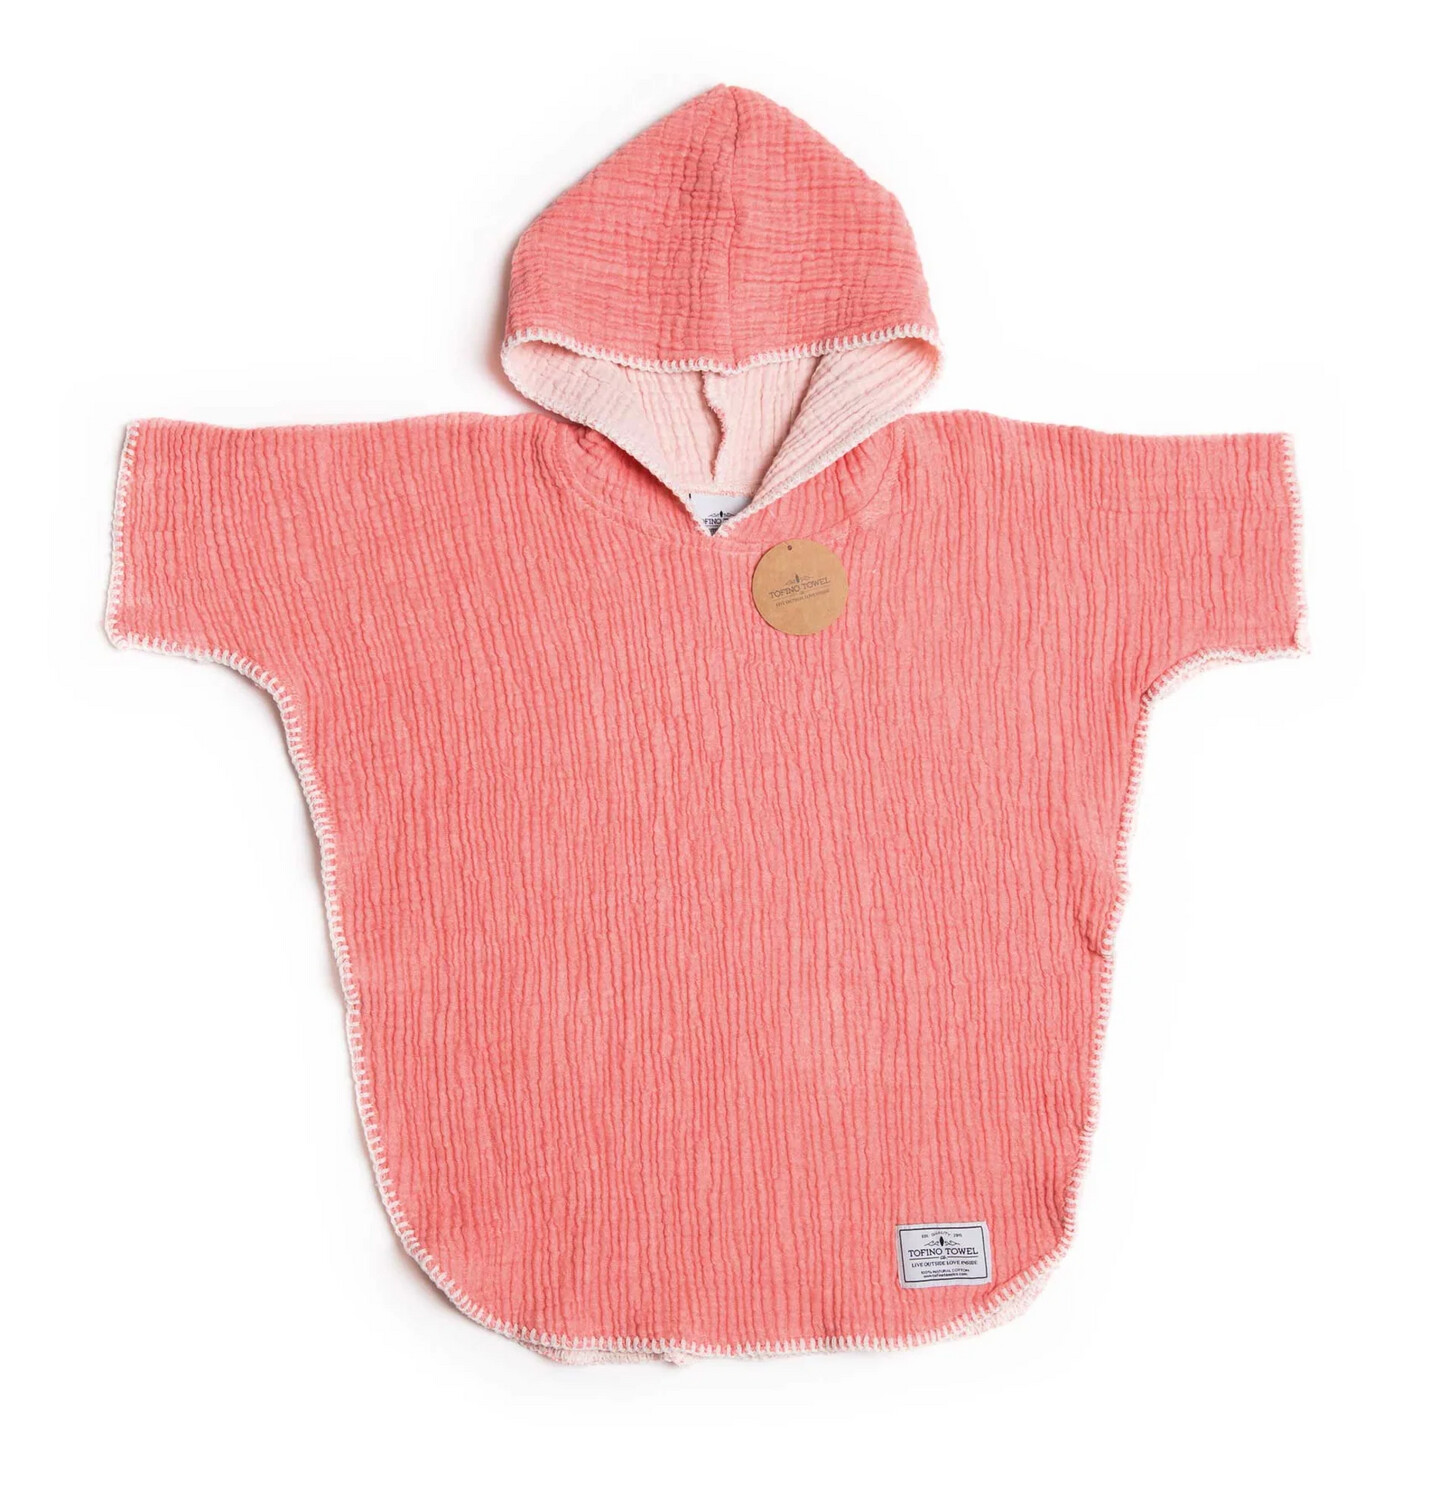 The Pebble Kids Poncho 12-24 Months (Coral)